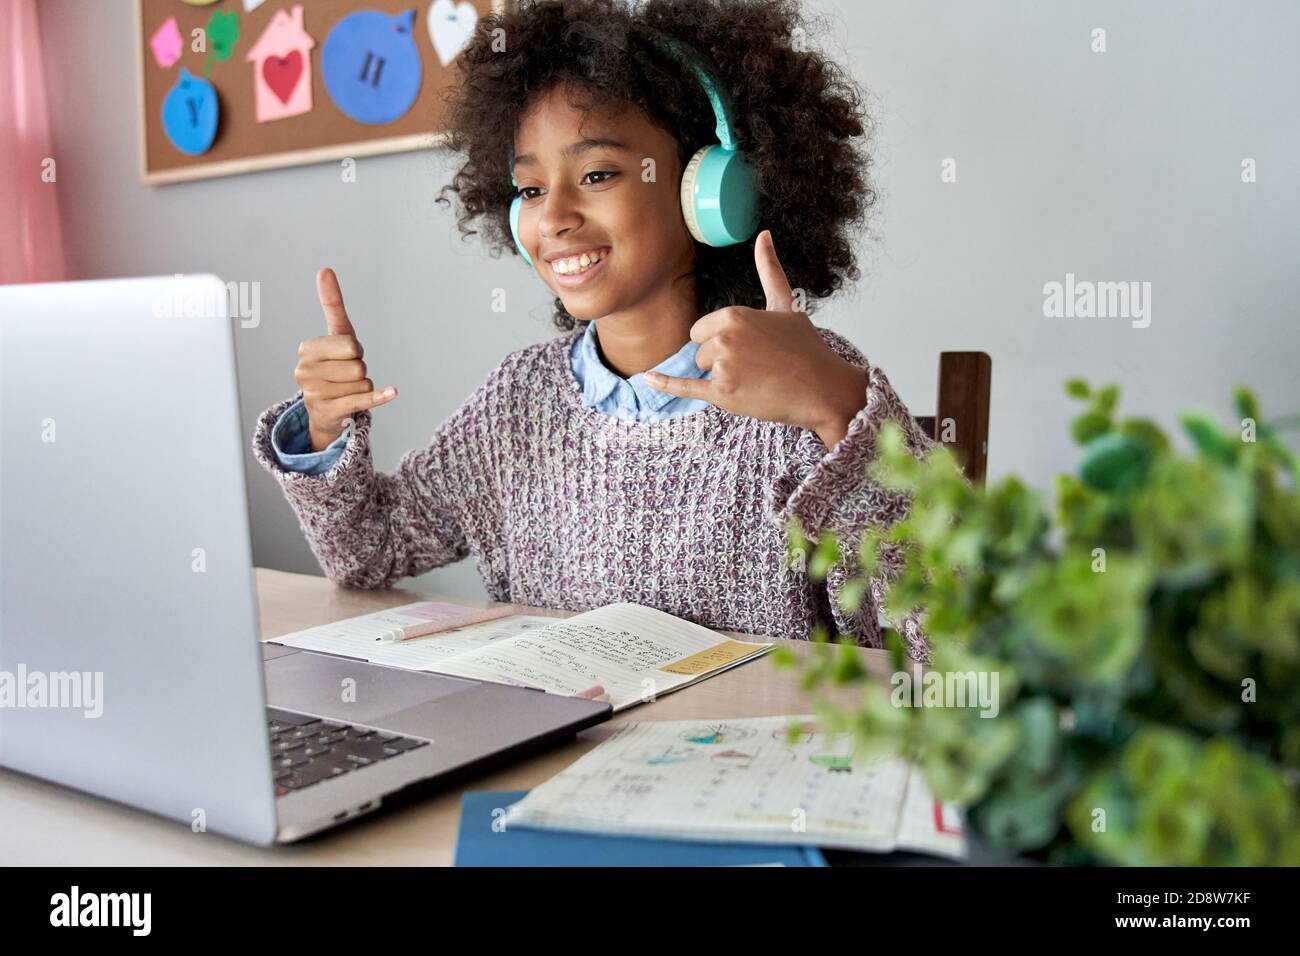 African mute kid girl showing sign language gesture learning online. Stock Photo